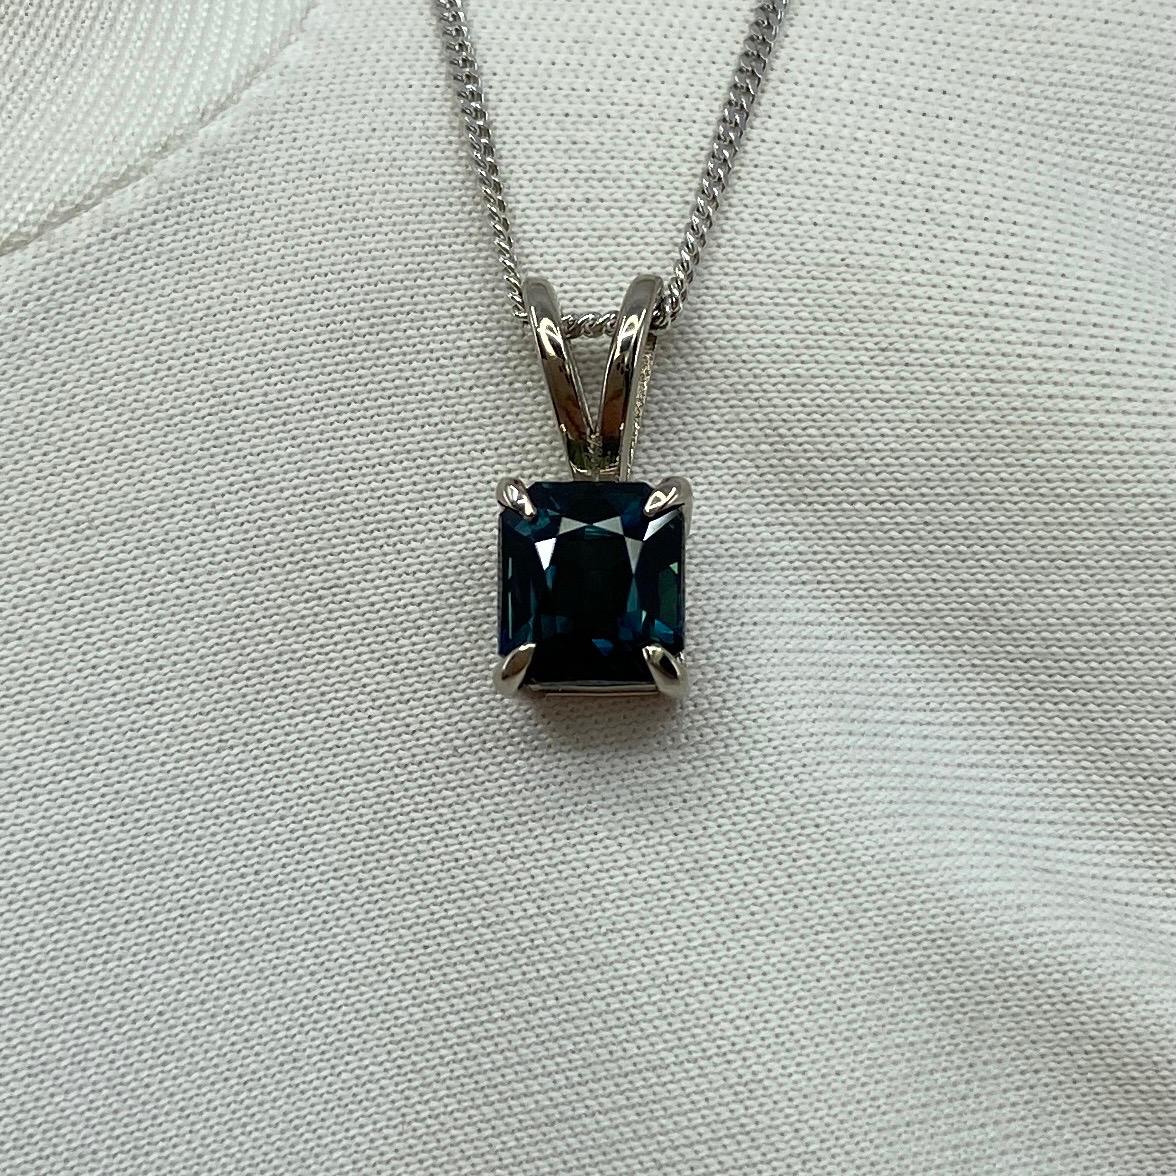 1.44ct IGI Certified Deep Teal Blue Untreated Sapphire 18k White Gold Pendant For Sale 4